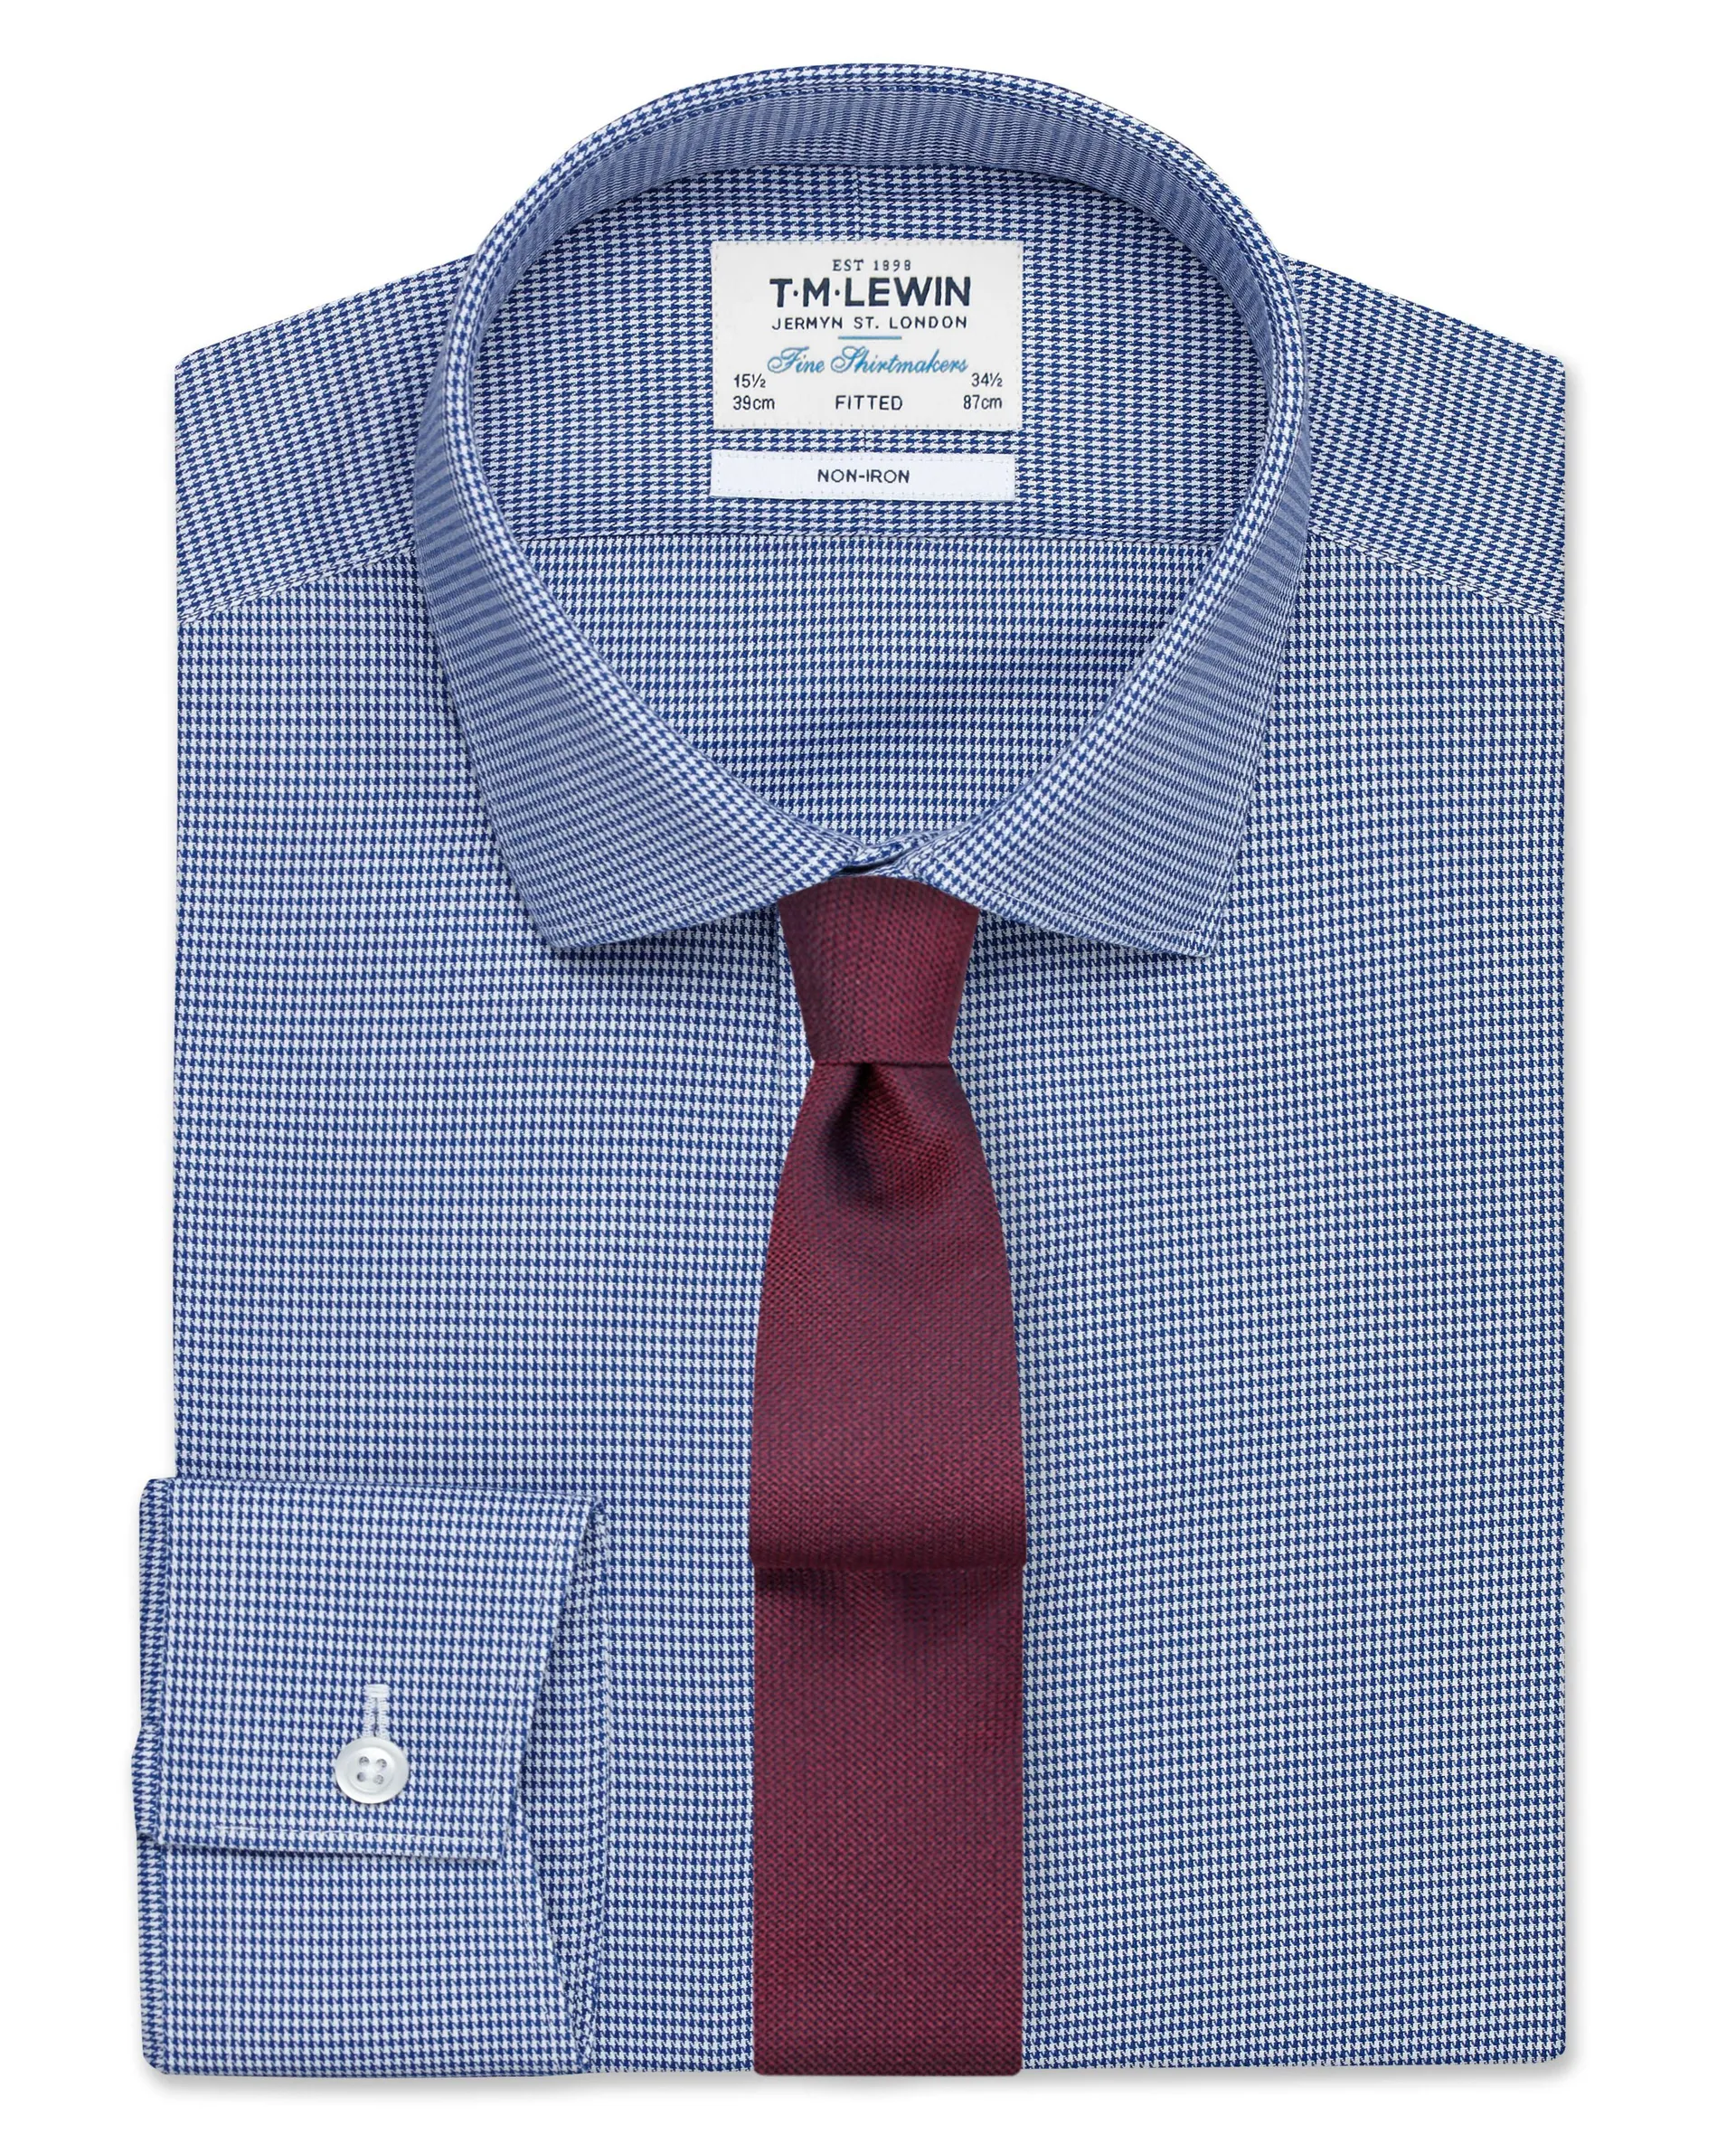 Non-Iron Navy Dogtooth Fitted Shirt